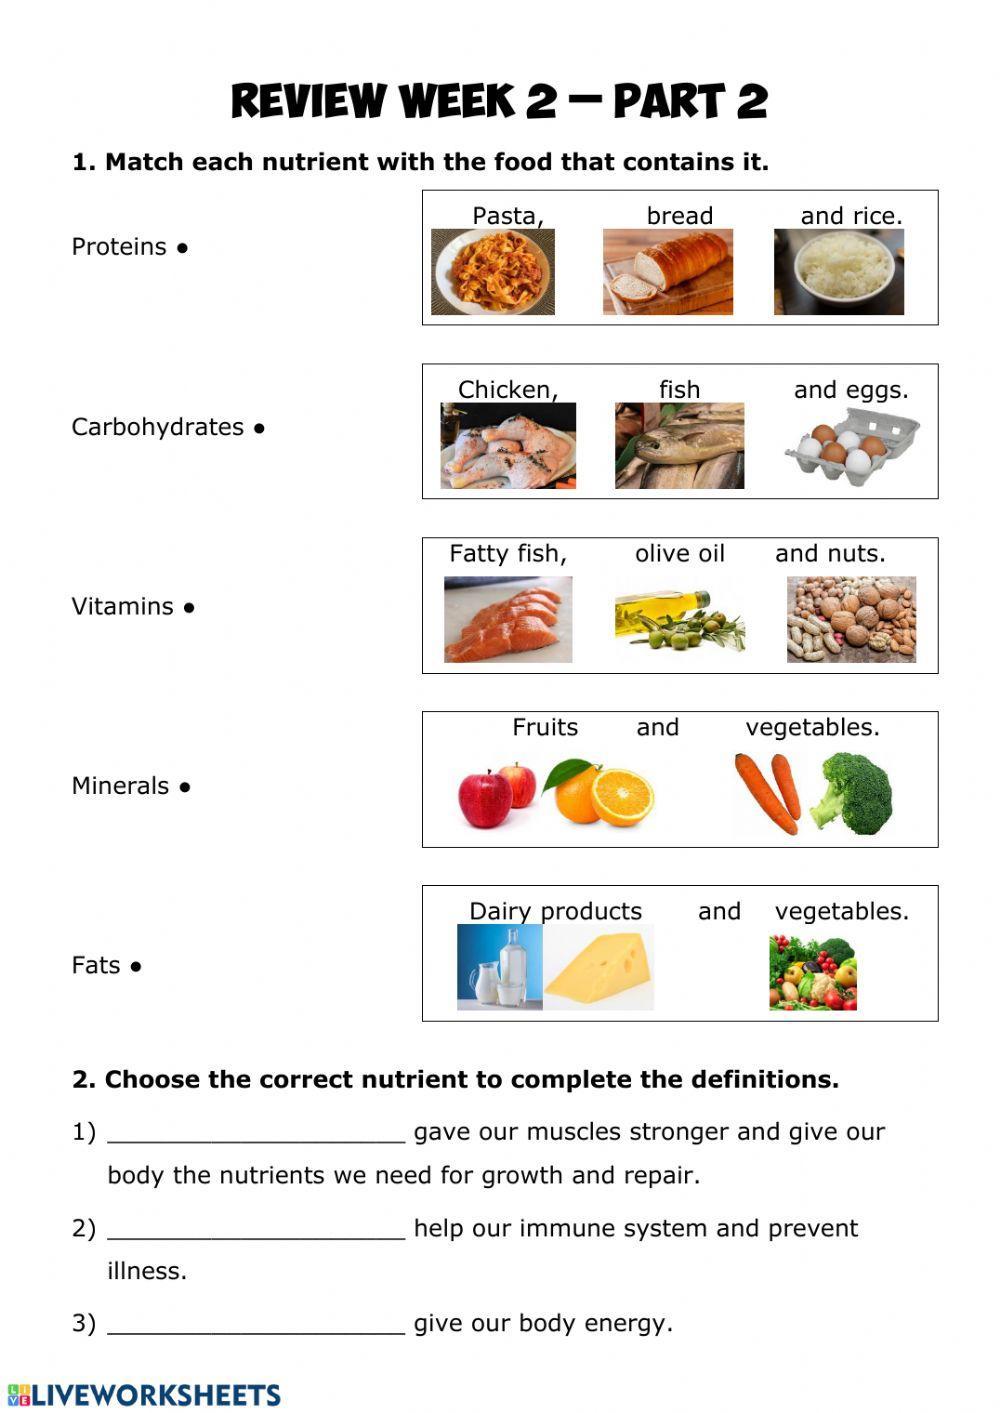 Nutrition review 2.2